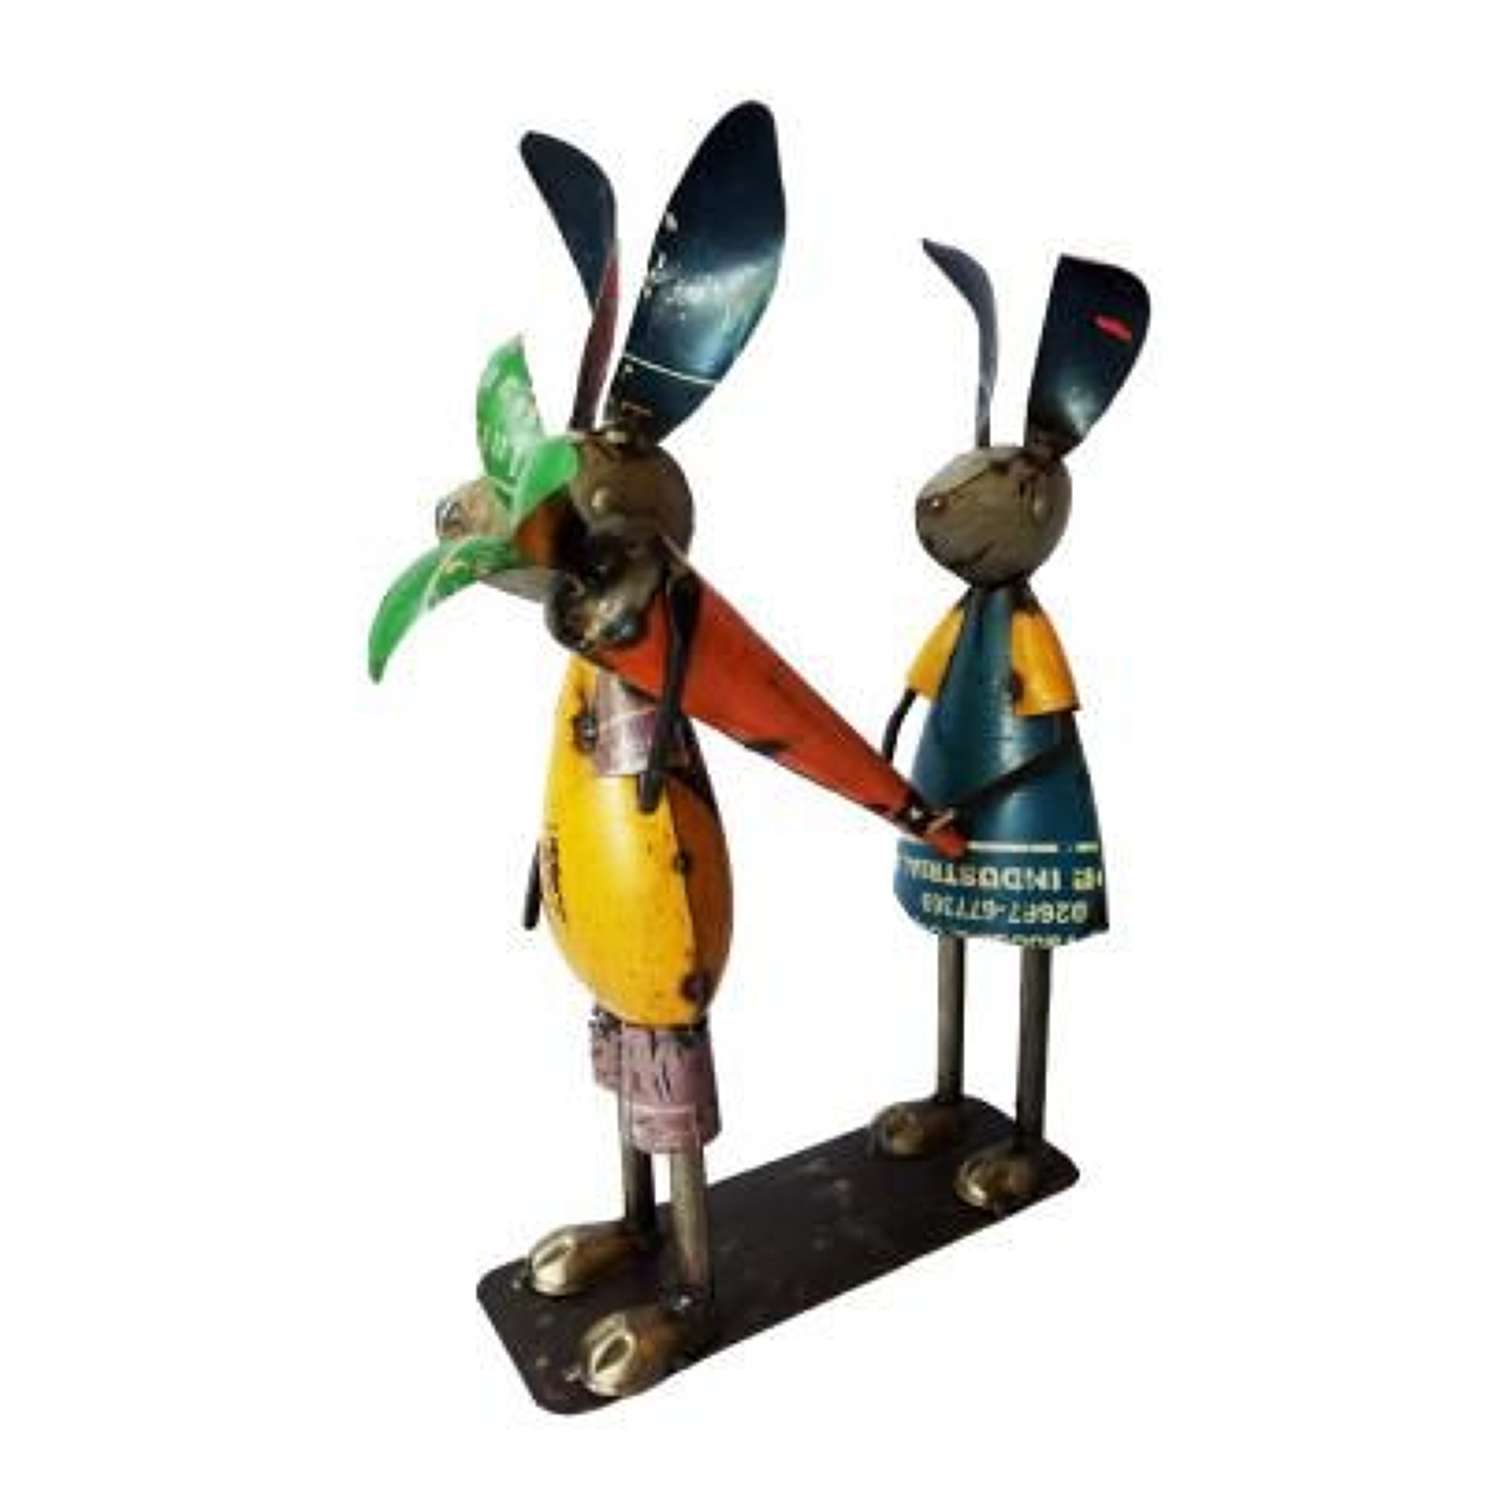 Recycled Iron Rabbits. Sharing the Load. Ref MH-6236